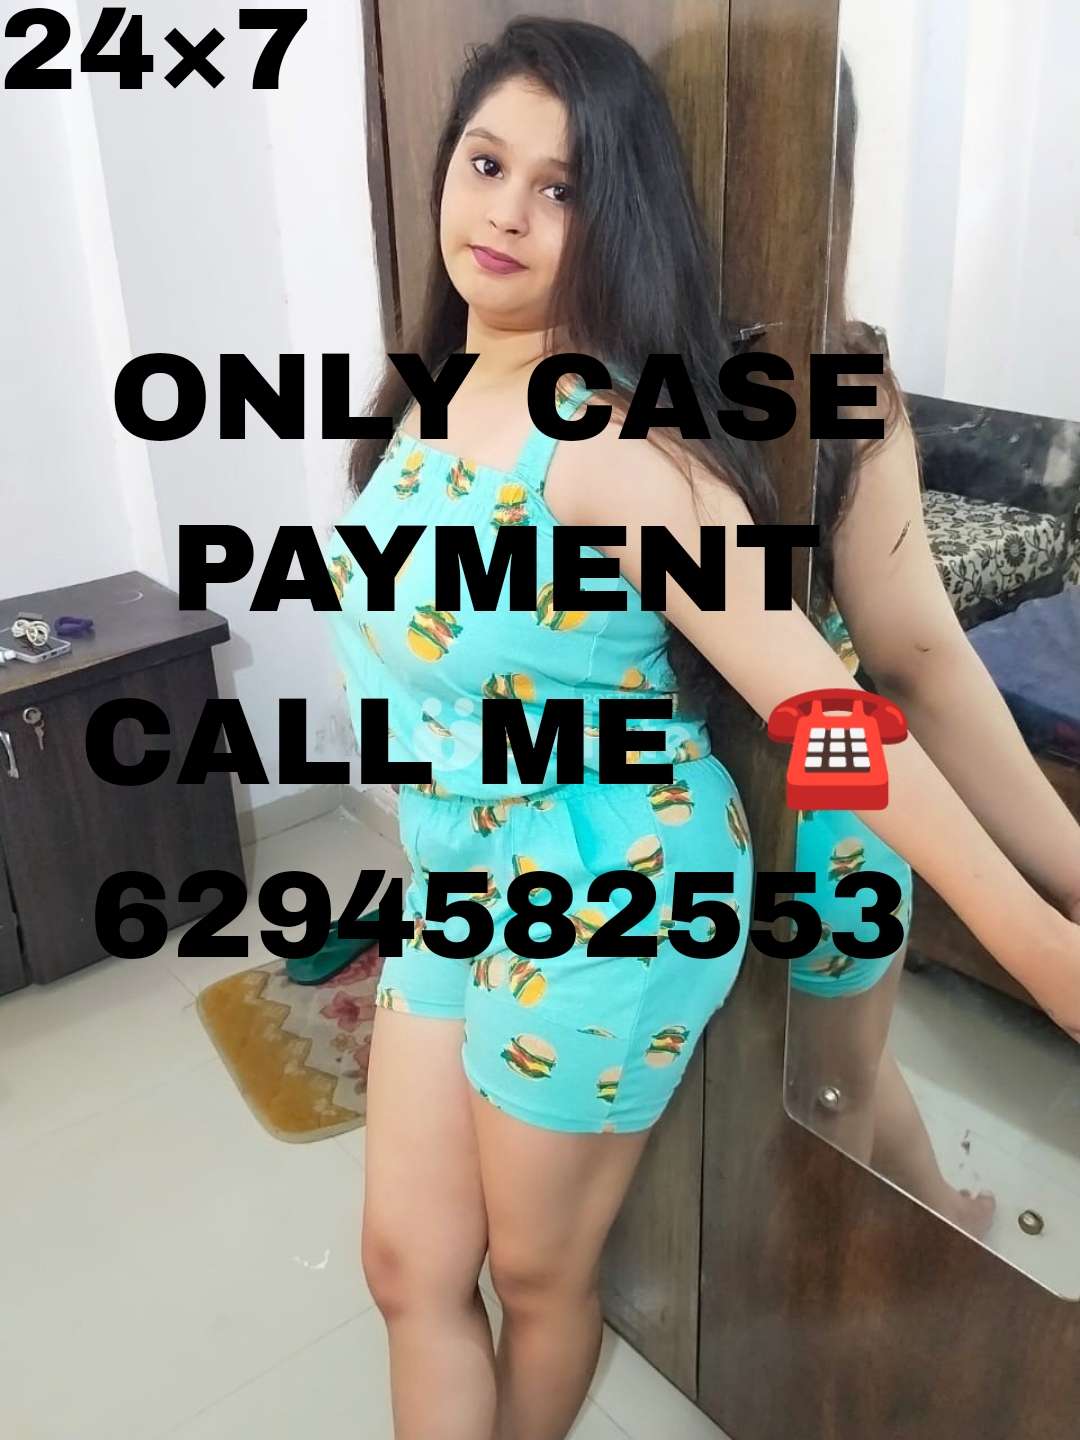 CASH ON PAYMENT NO ADVANCE GENUINE INDEPENDENT ESCORTS WITH SEXY GIRL 